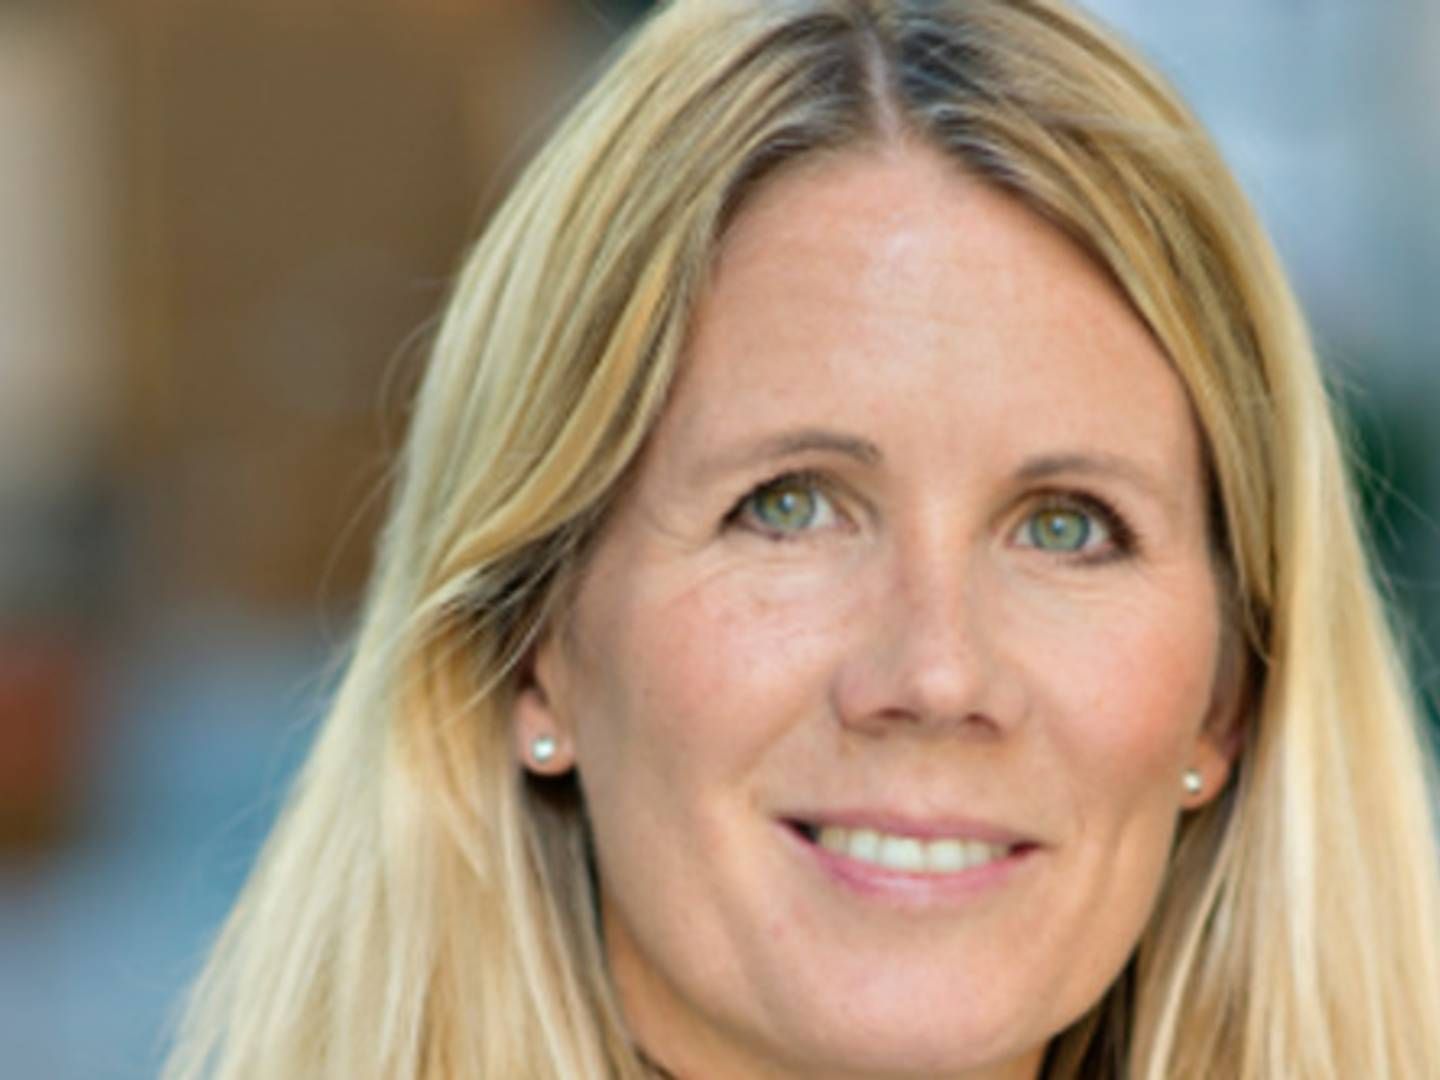 Nordea Co-head of Responsible Investment Katarina Hammar comments: "The company makes up a very small share of investments but we take this type of information seriously. While we are currently reviewing this investment, we have yet to make a decision. | Photo: Nordea / PR